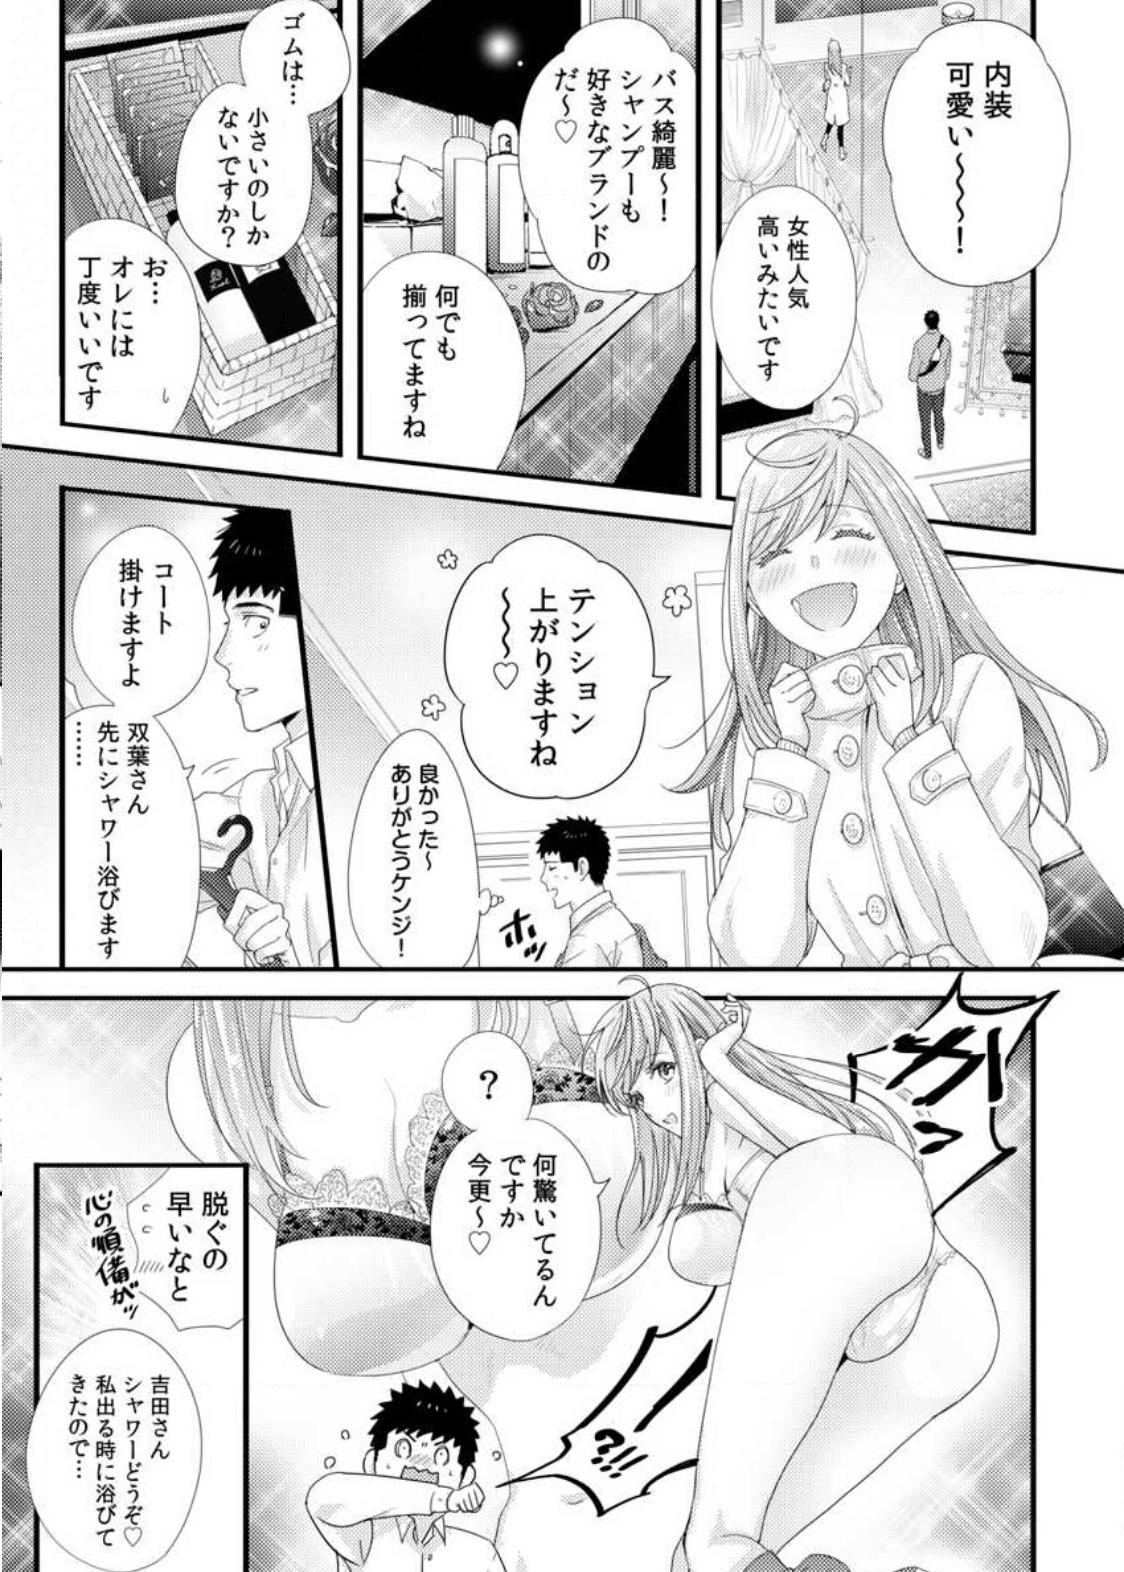 Please Let Me Hold You Futaba-San! Ch. 1-4 91